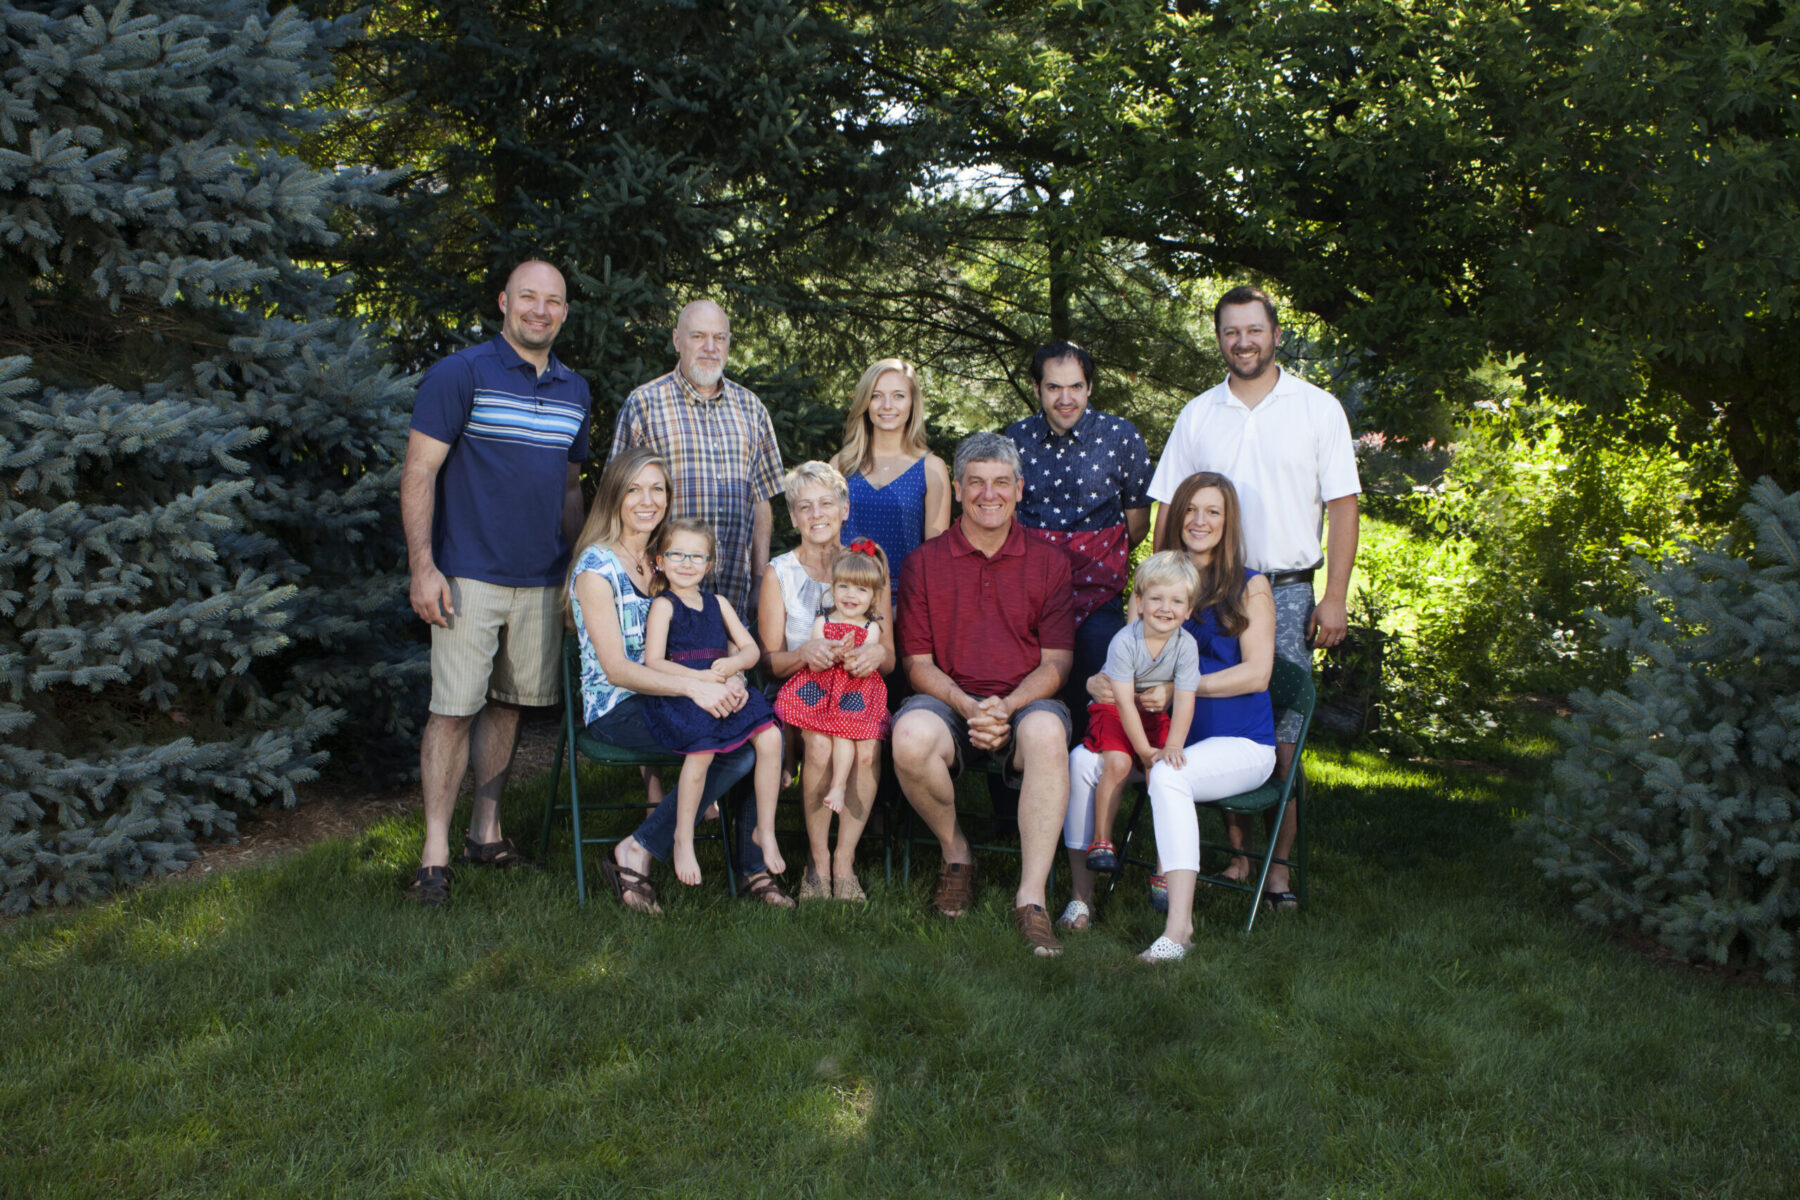 A three-generation family poses together for an outdoor portrait in a garden setting.